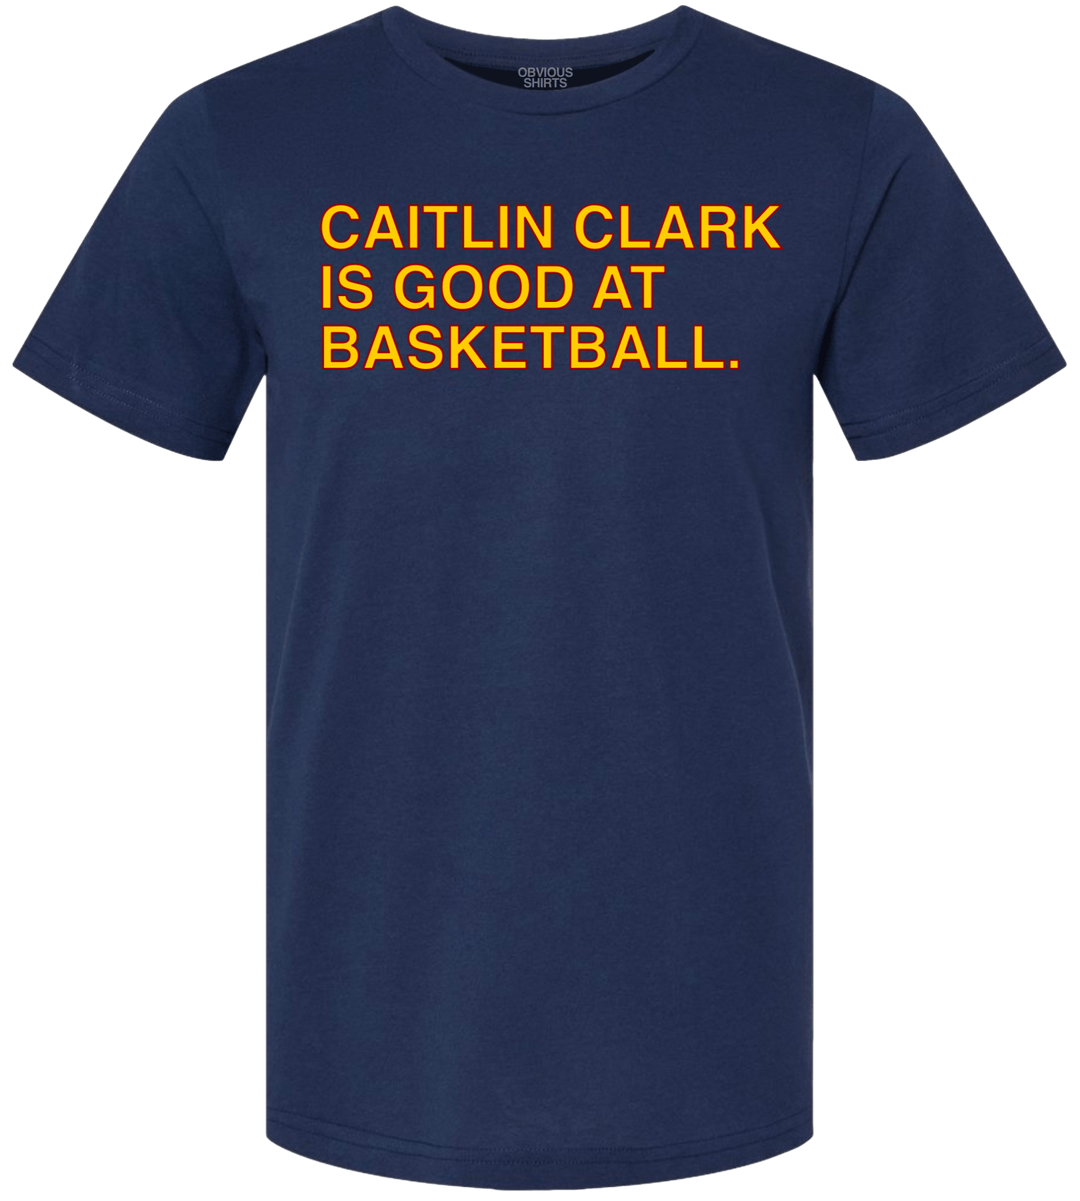 CAITLIN CLARK IS GOOD AT BASKETBALL. - OBVIOUS SHIRTS